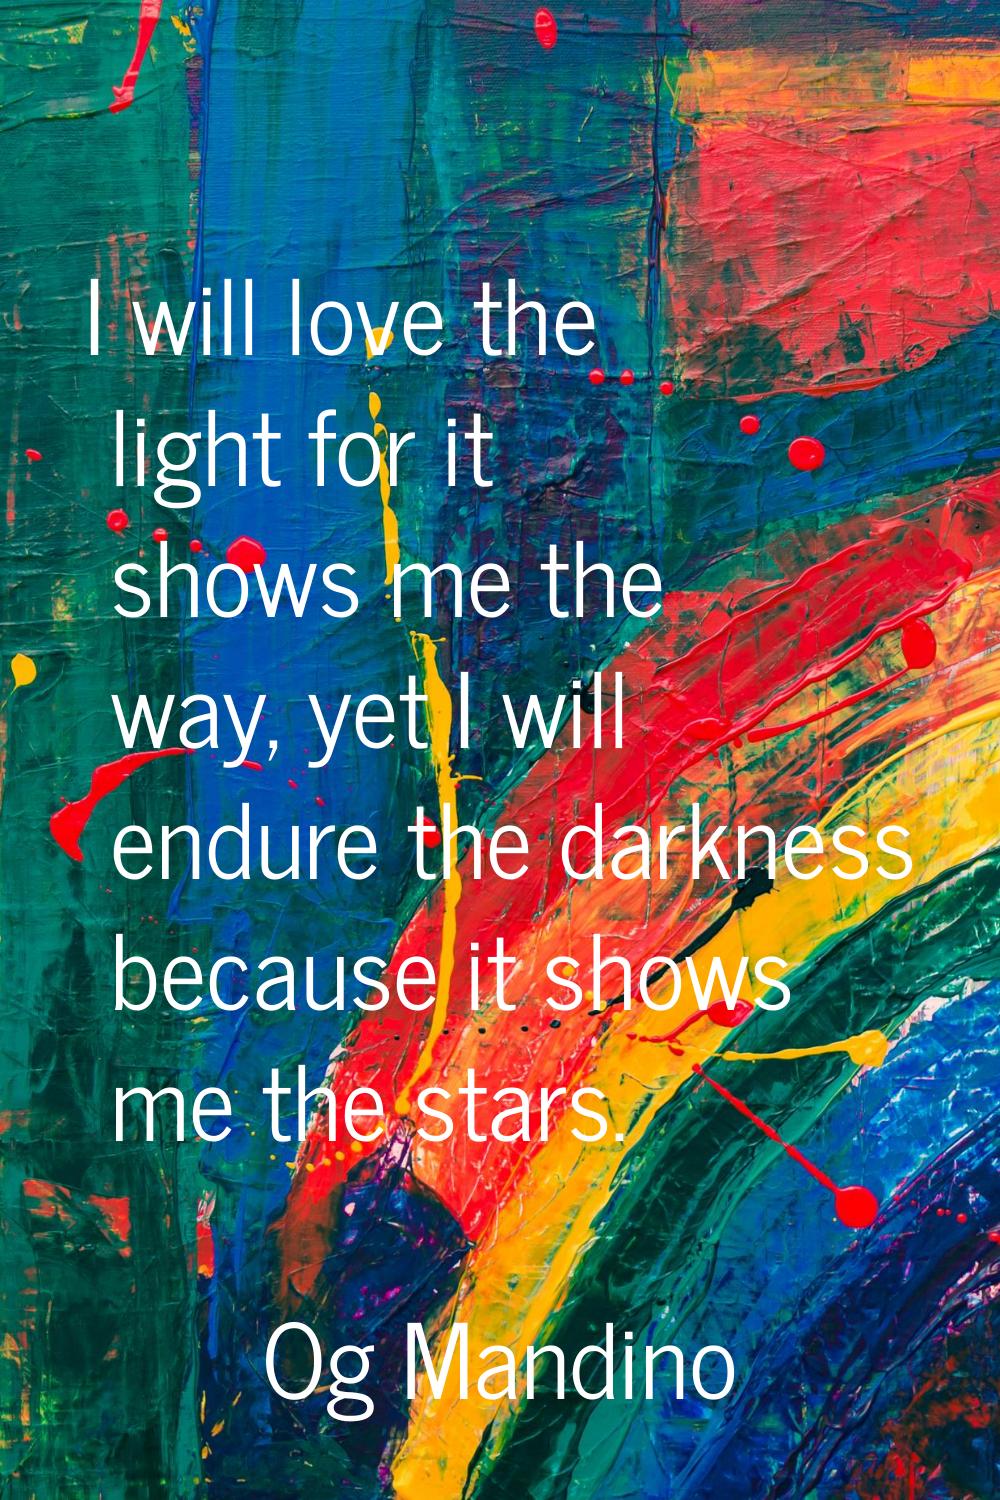 I will love the light for it shows me the way, yet I will endure the darkness because it shows me t